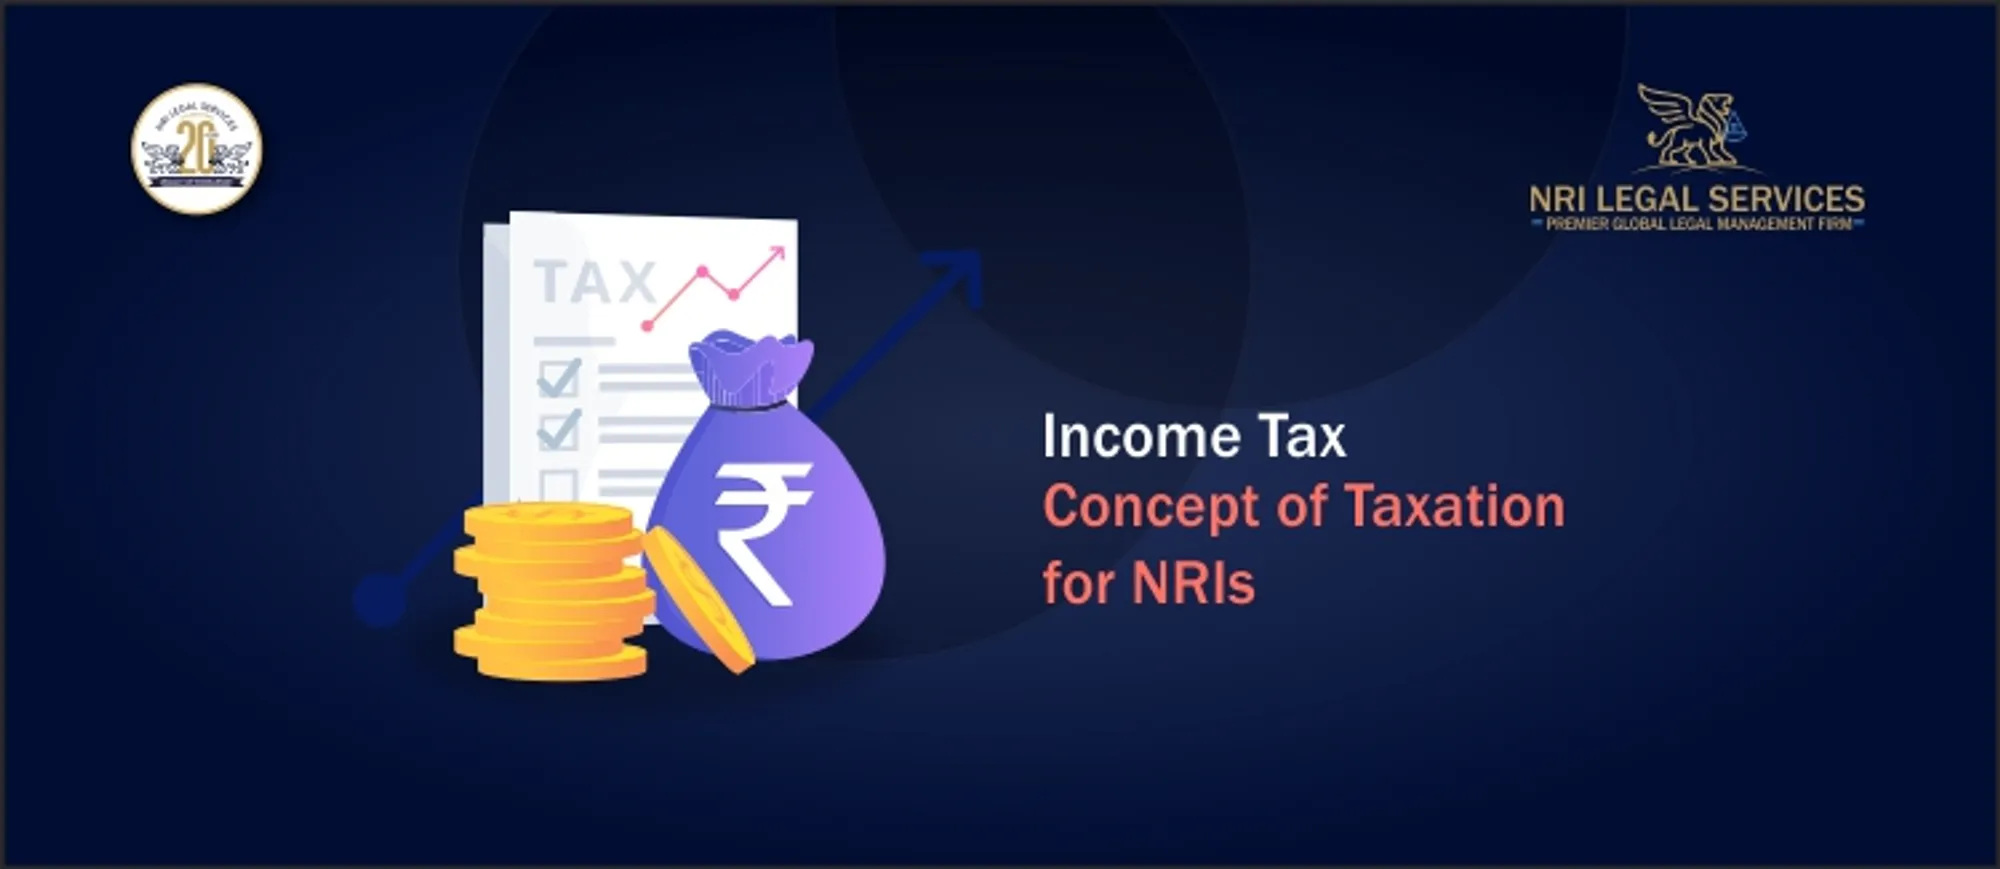 Income Tax Concept of Taxation for NRIs